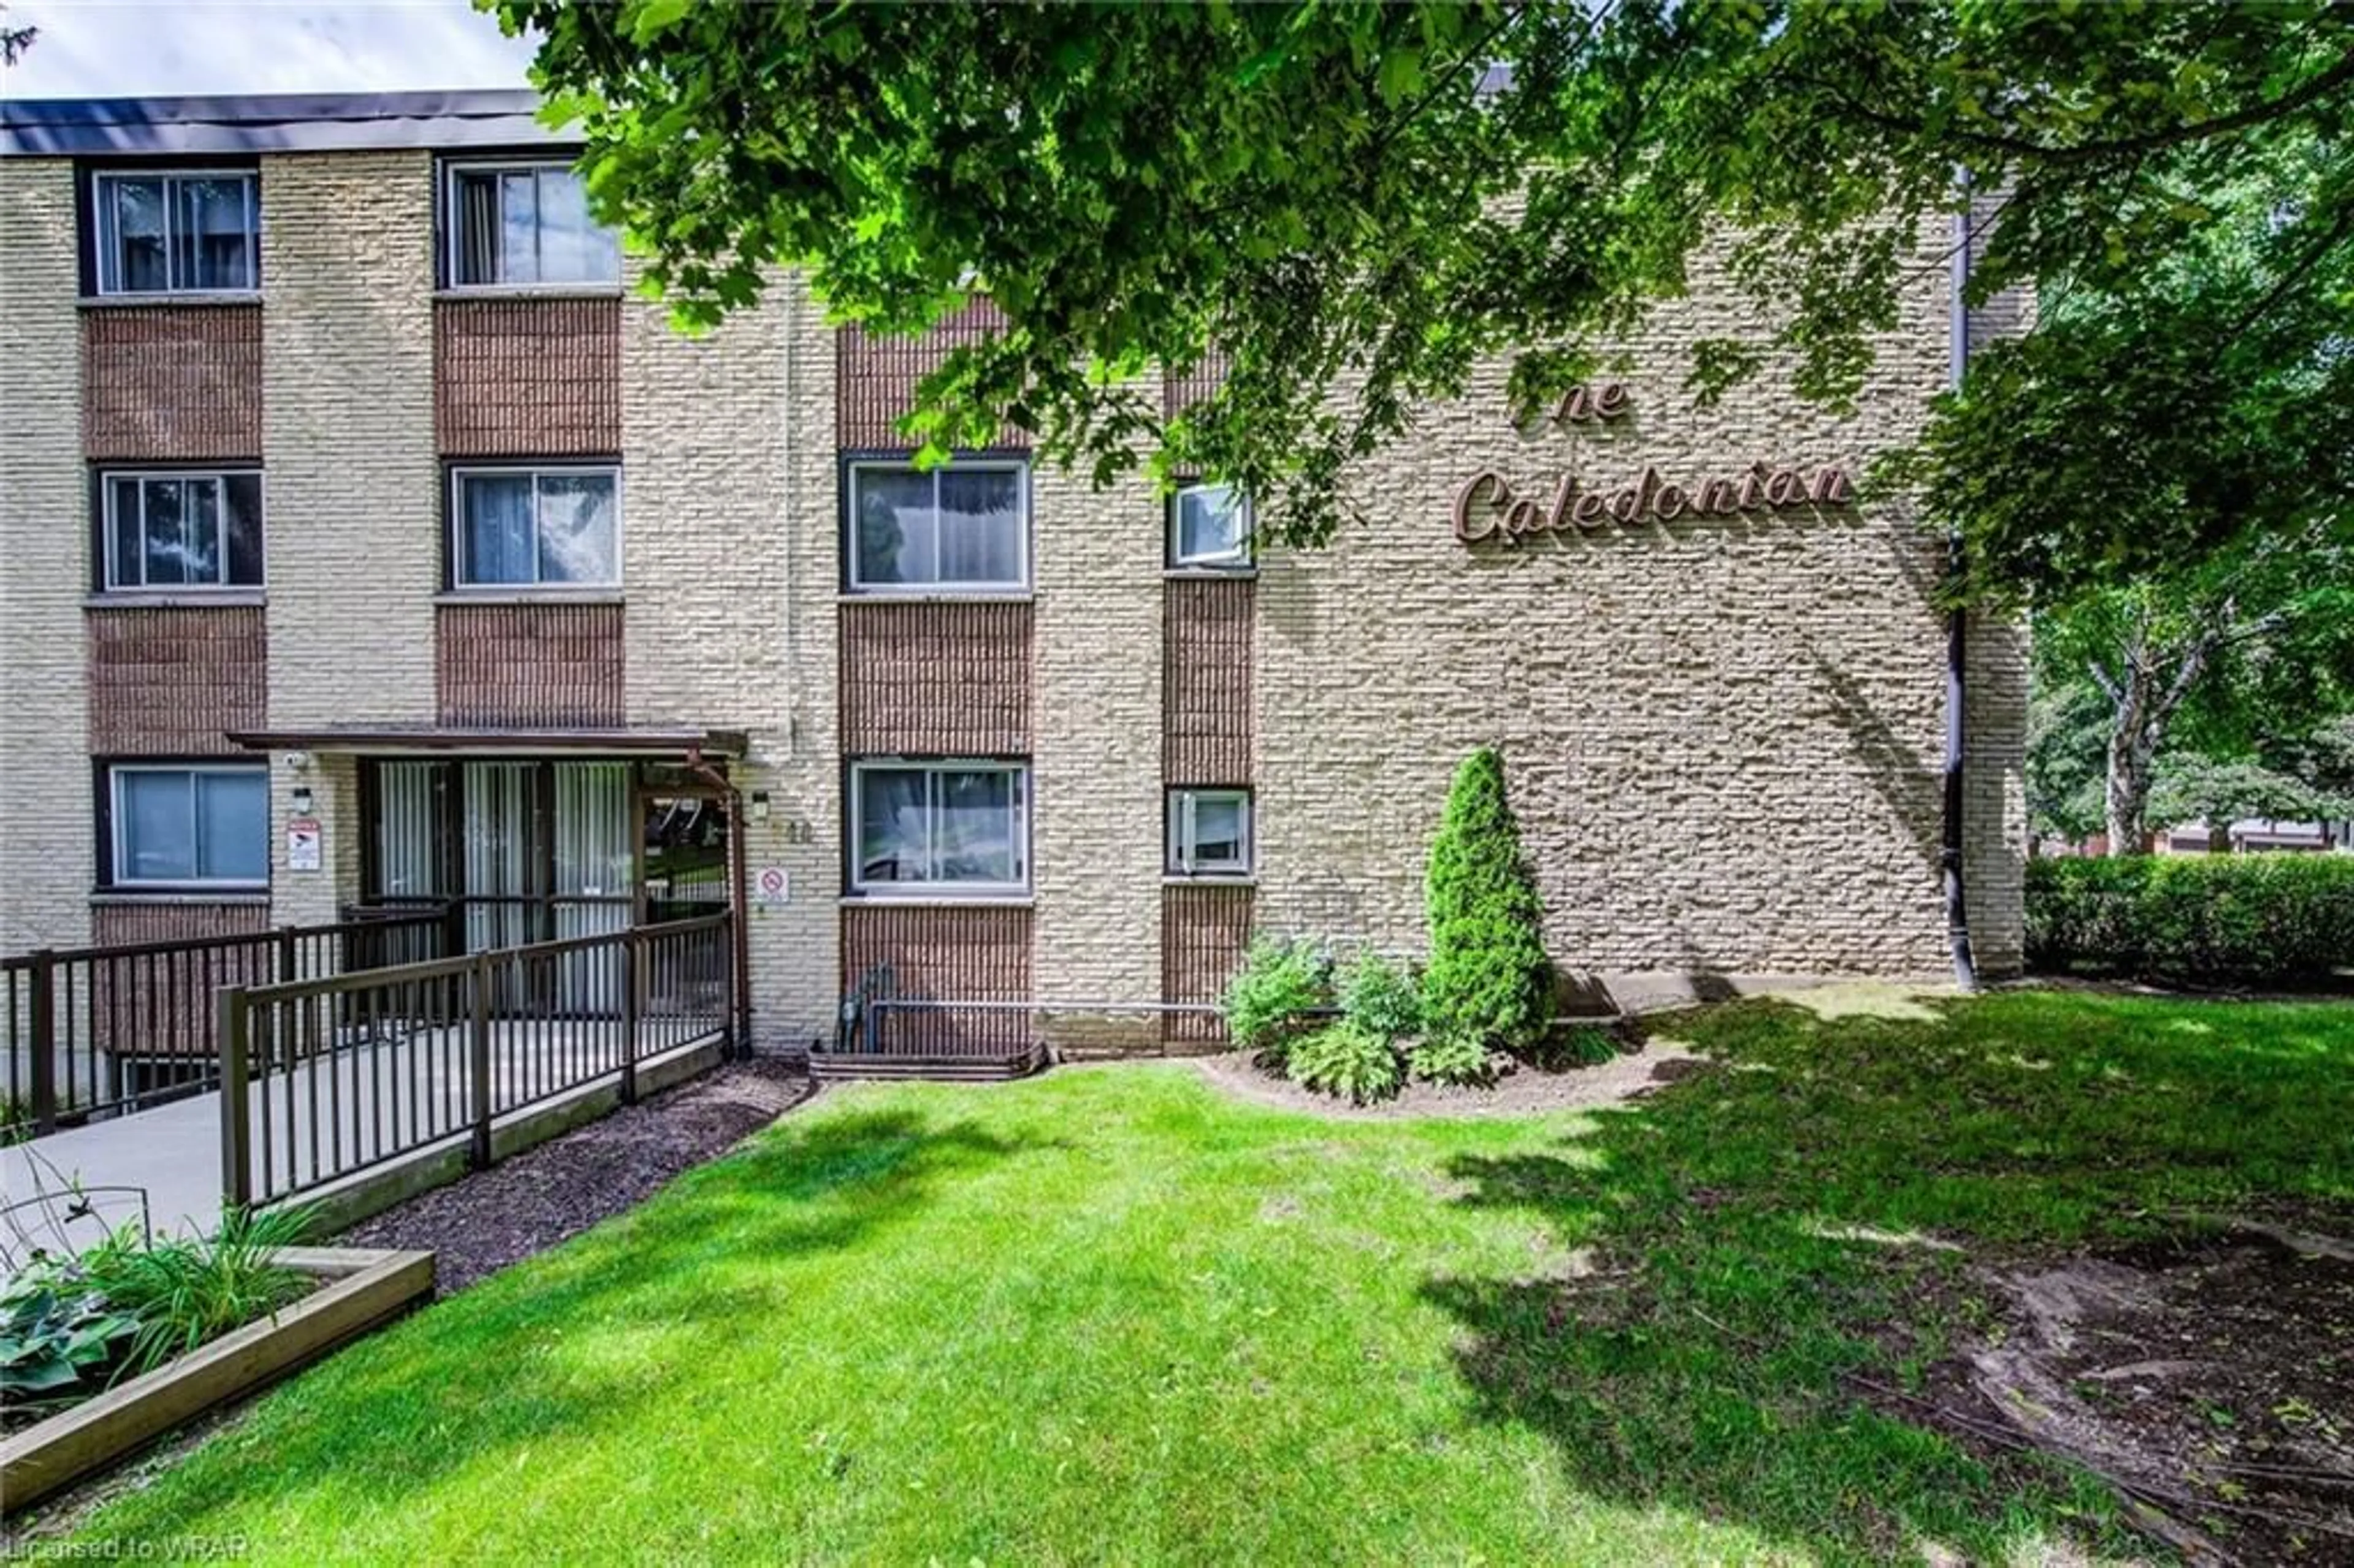 A pic from exterior of the house or condo for 944 Caledonian View #406, Cambridge Ontario N3H 1A5